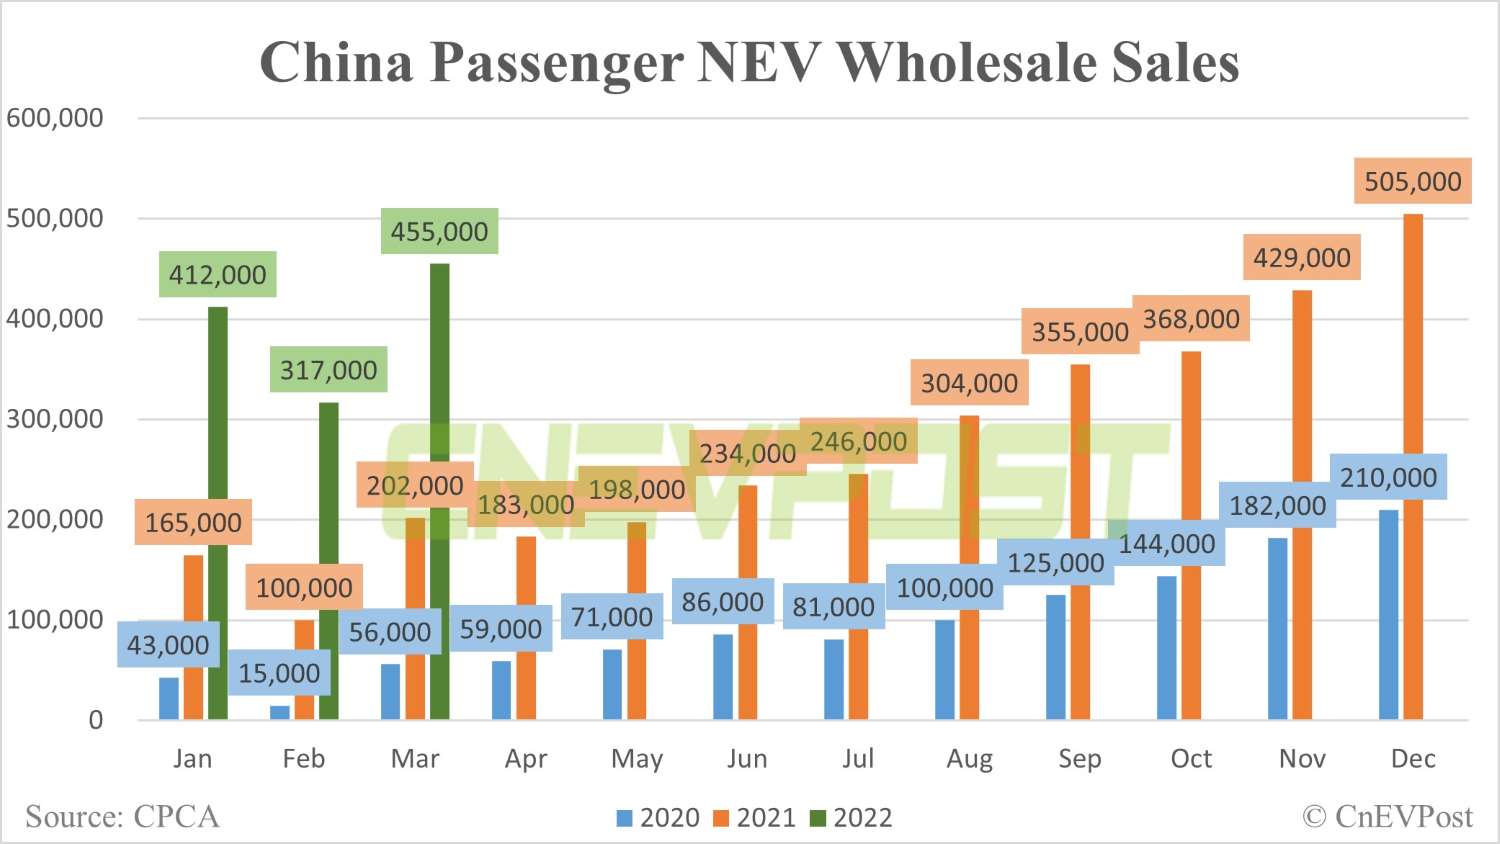 China sees wholesale sales of passenger NEVs at 455,000 units in March, up 122% year-on-year-CnEVPost